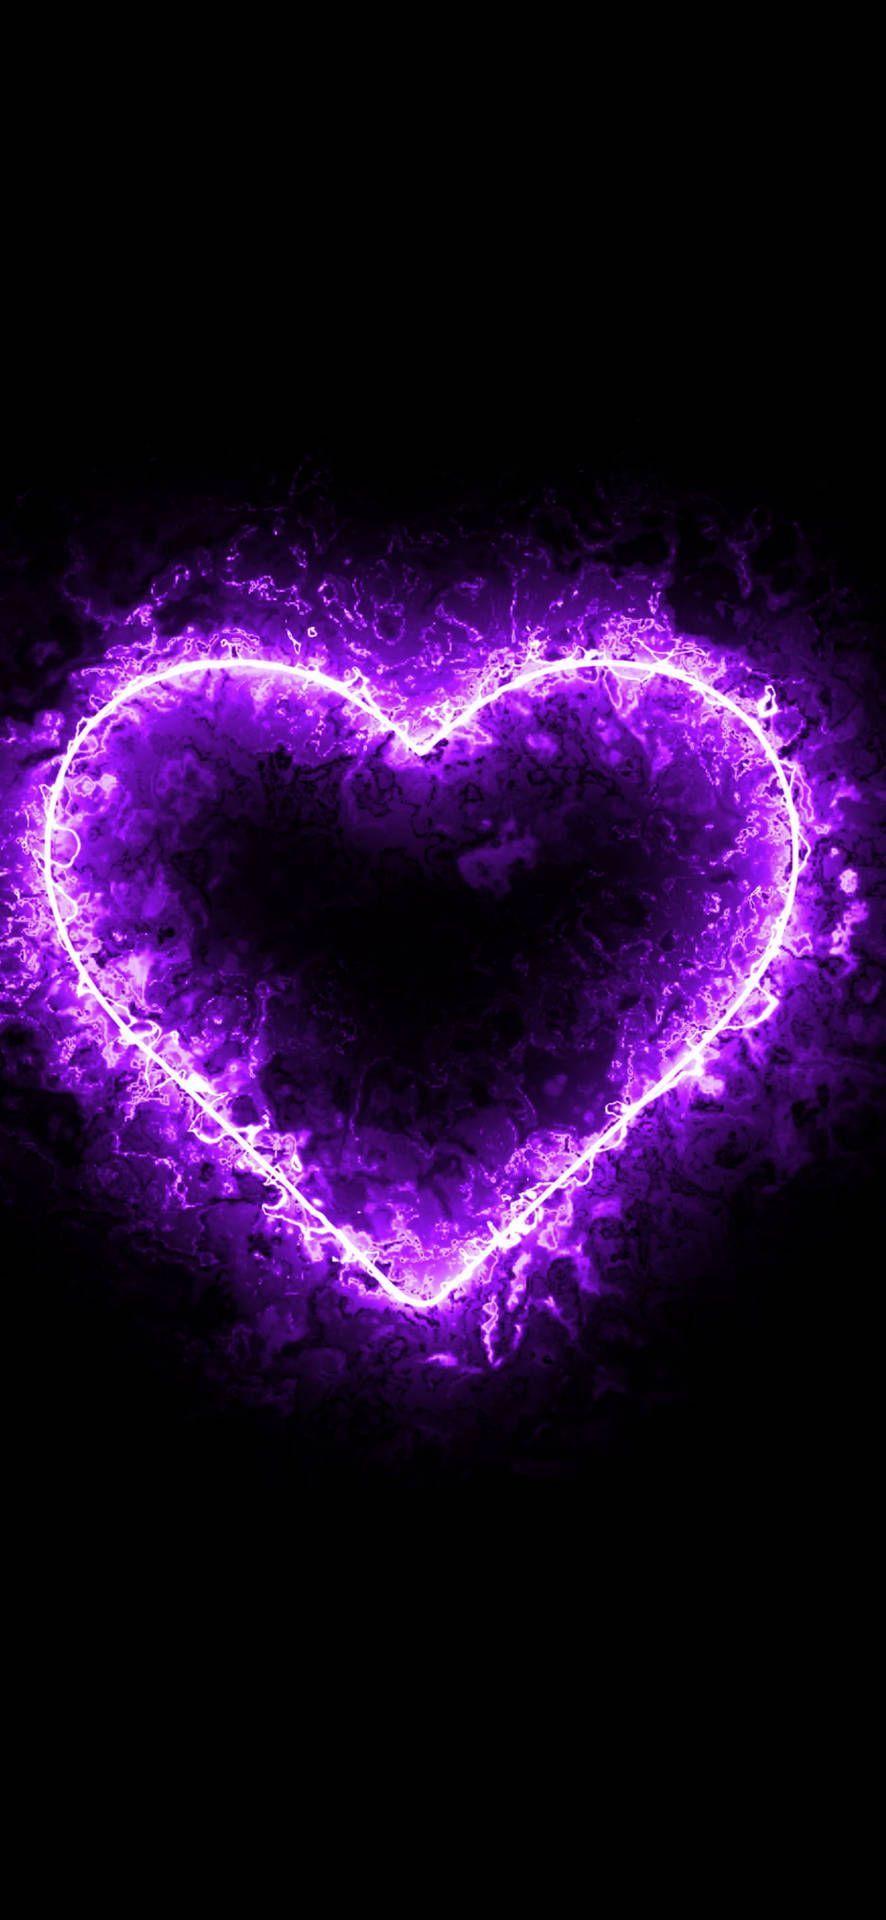 Download Black And Purple Aesthetic Textured Heart Wallpaper